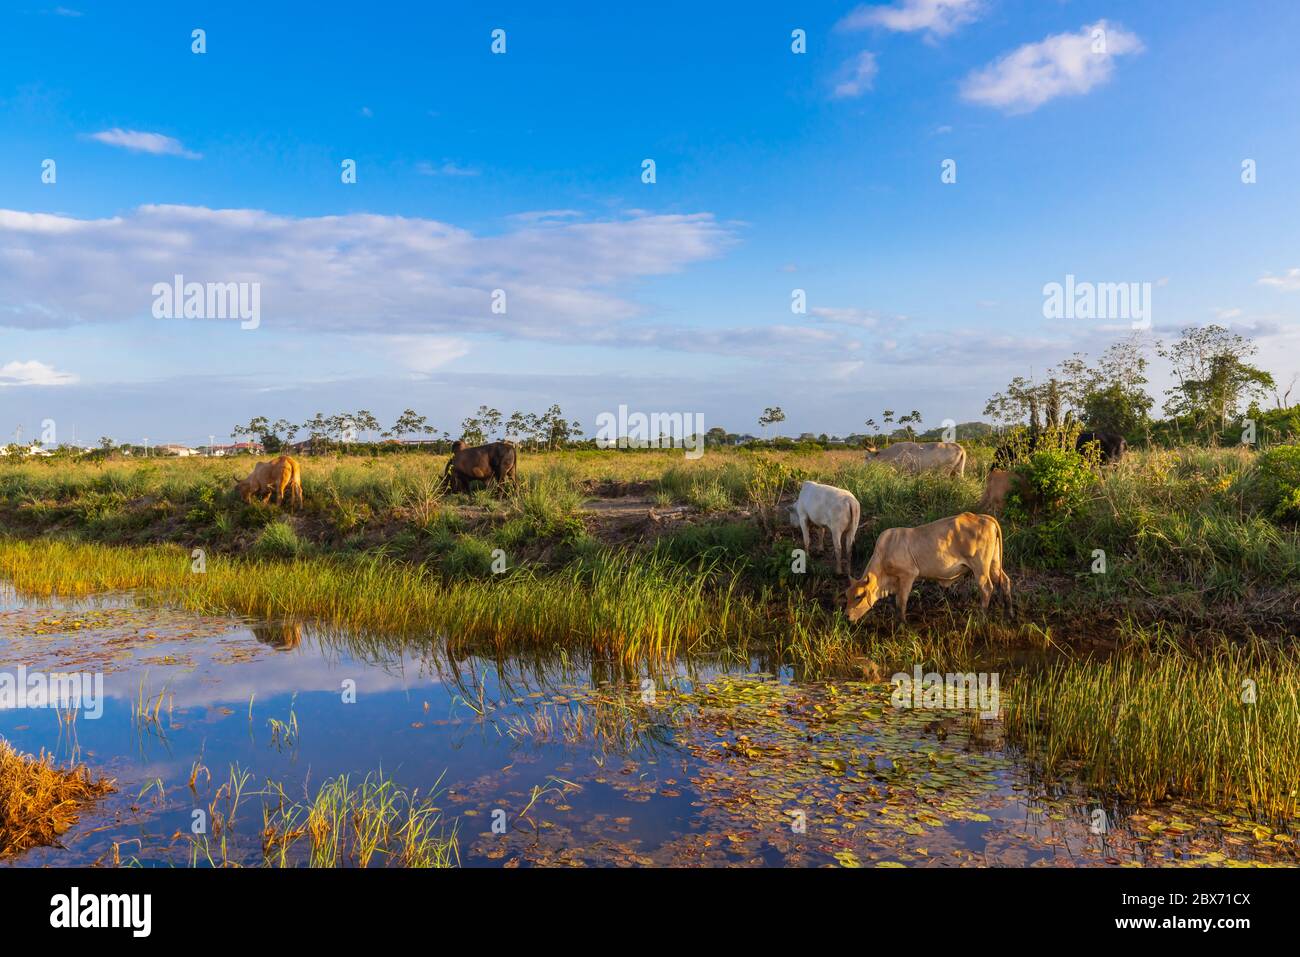 Herd Of Cows On Grassy Landscape In Suriname Stock Photo